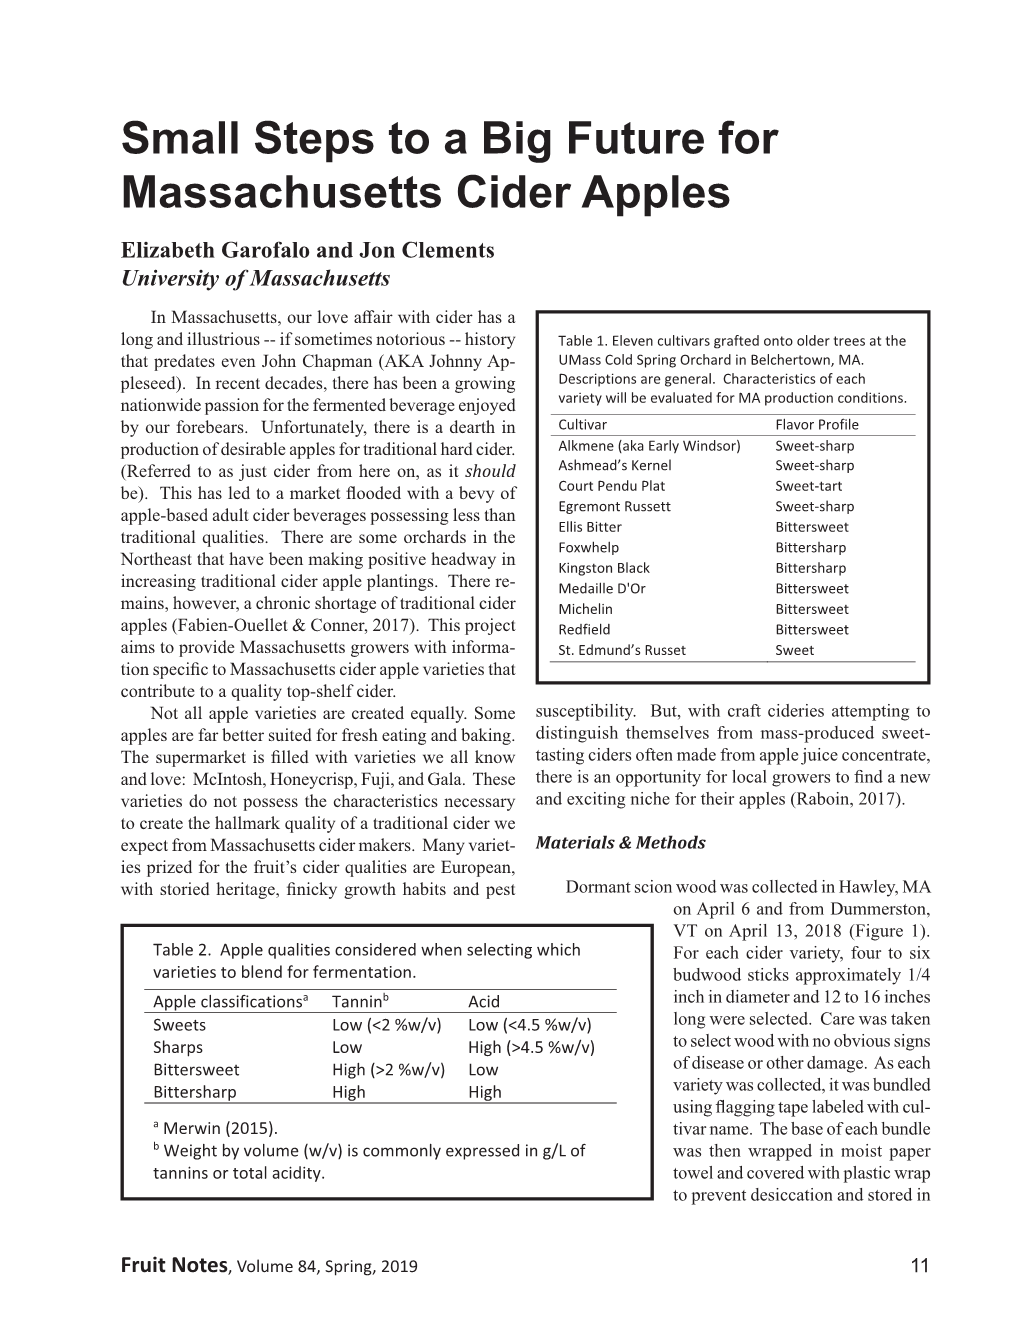 Small Steps to a Big Future for Massachusetts Cider